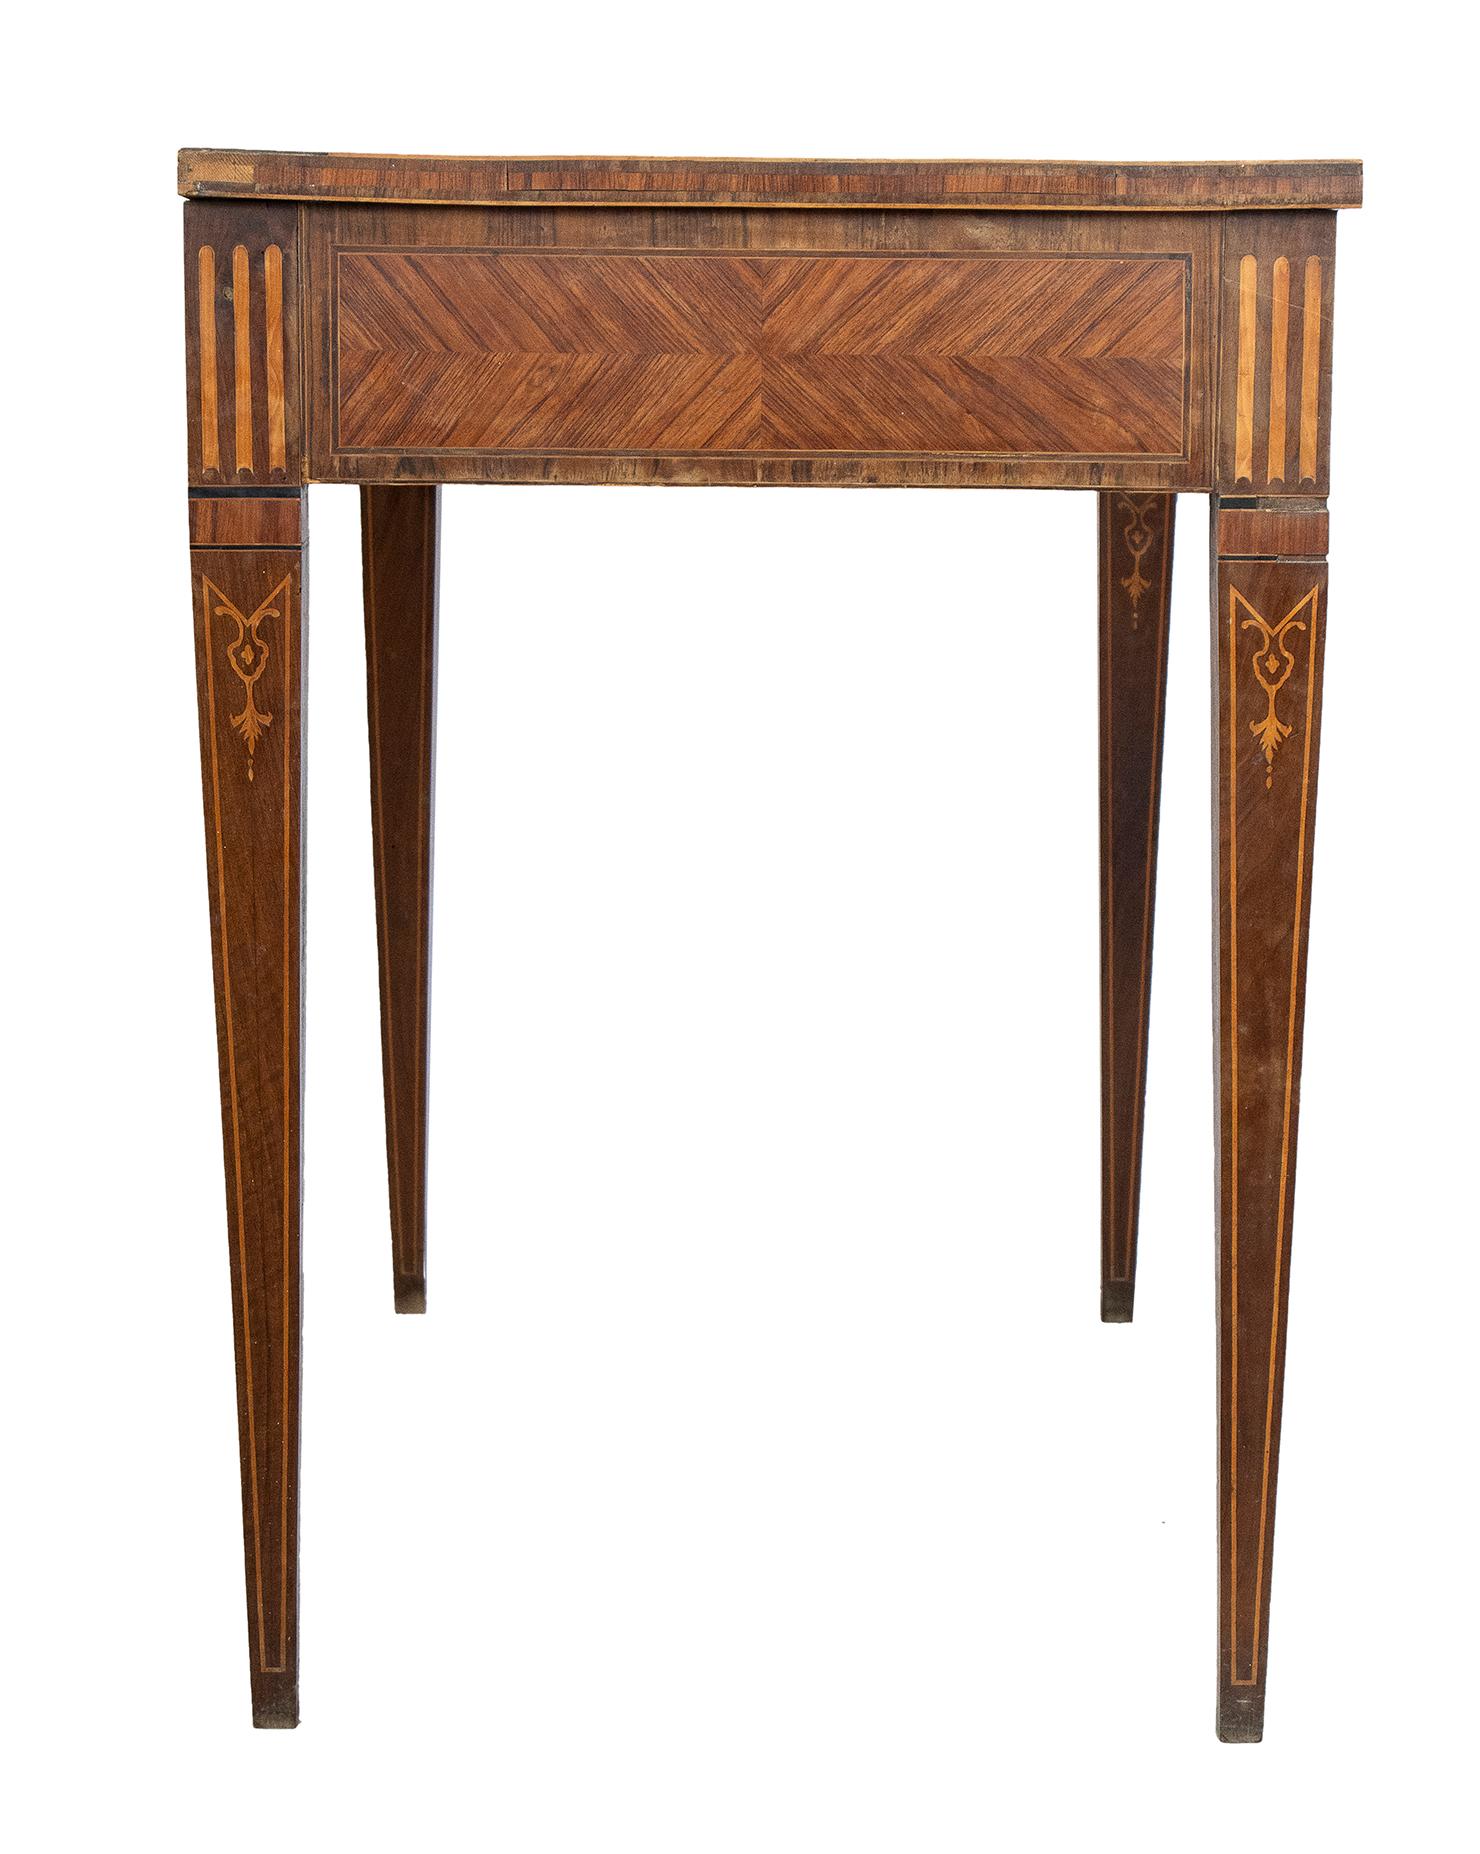 18th Century Pair of Italian Kingwood Inlay Console Table Lombardy For Sale 5